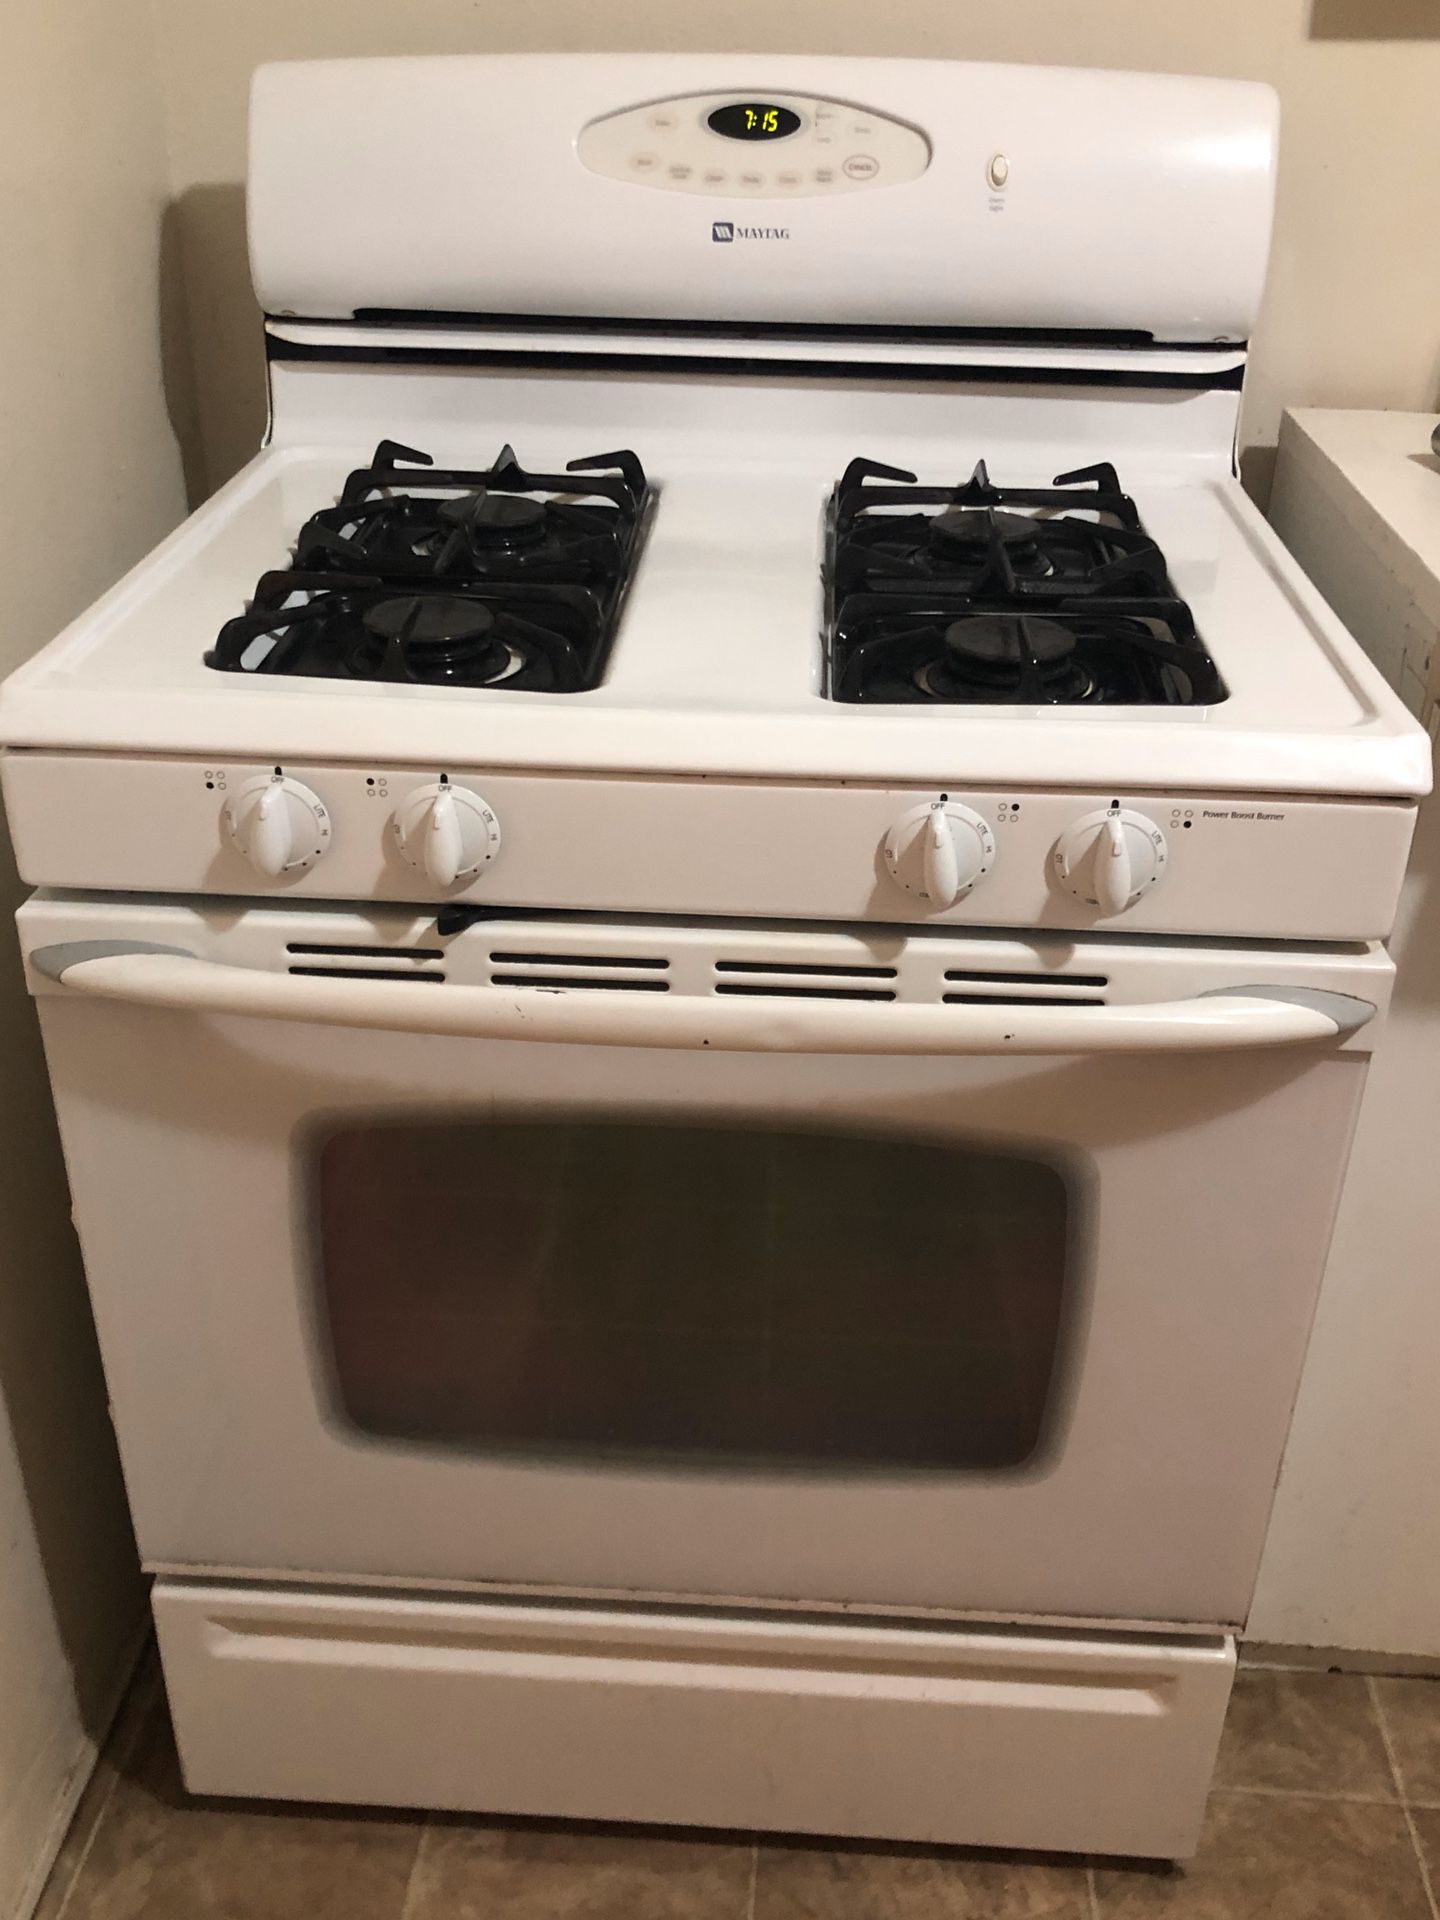 Maytag Stove, Clean & good condition